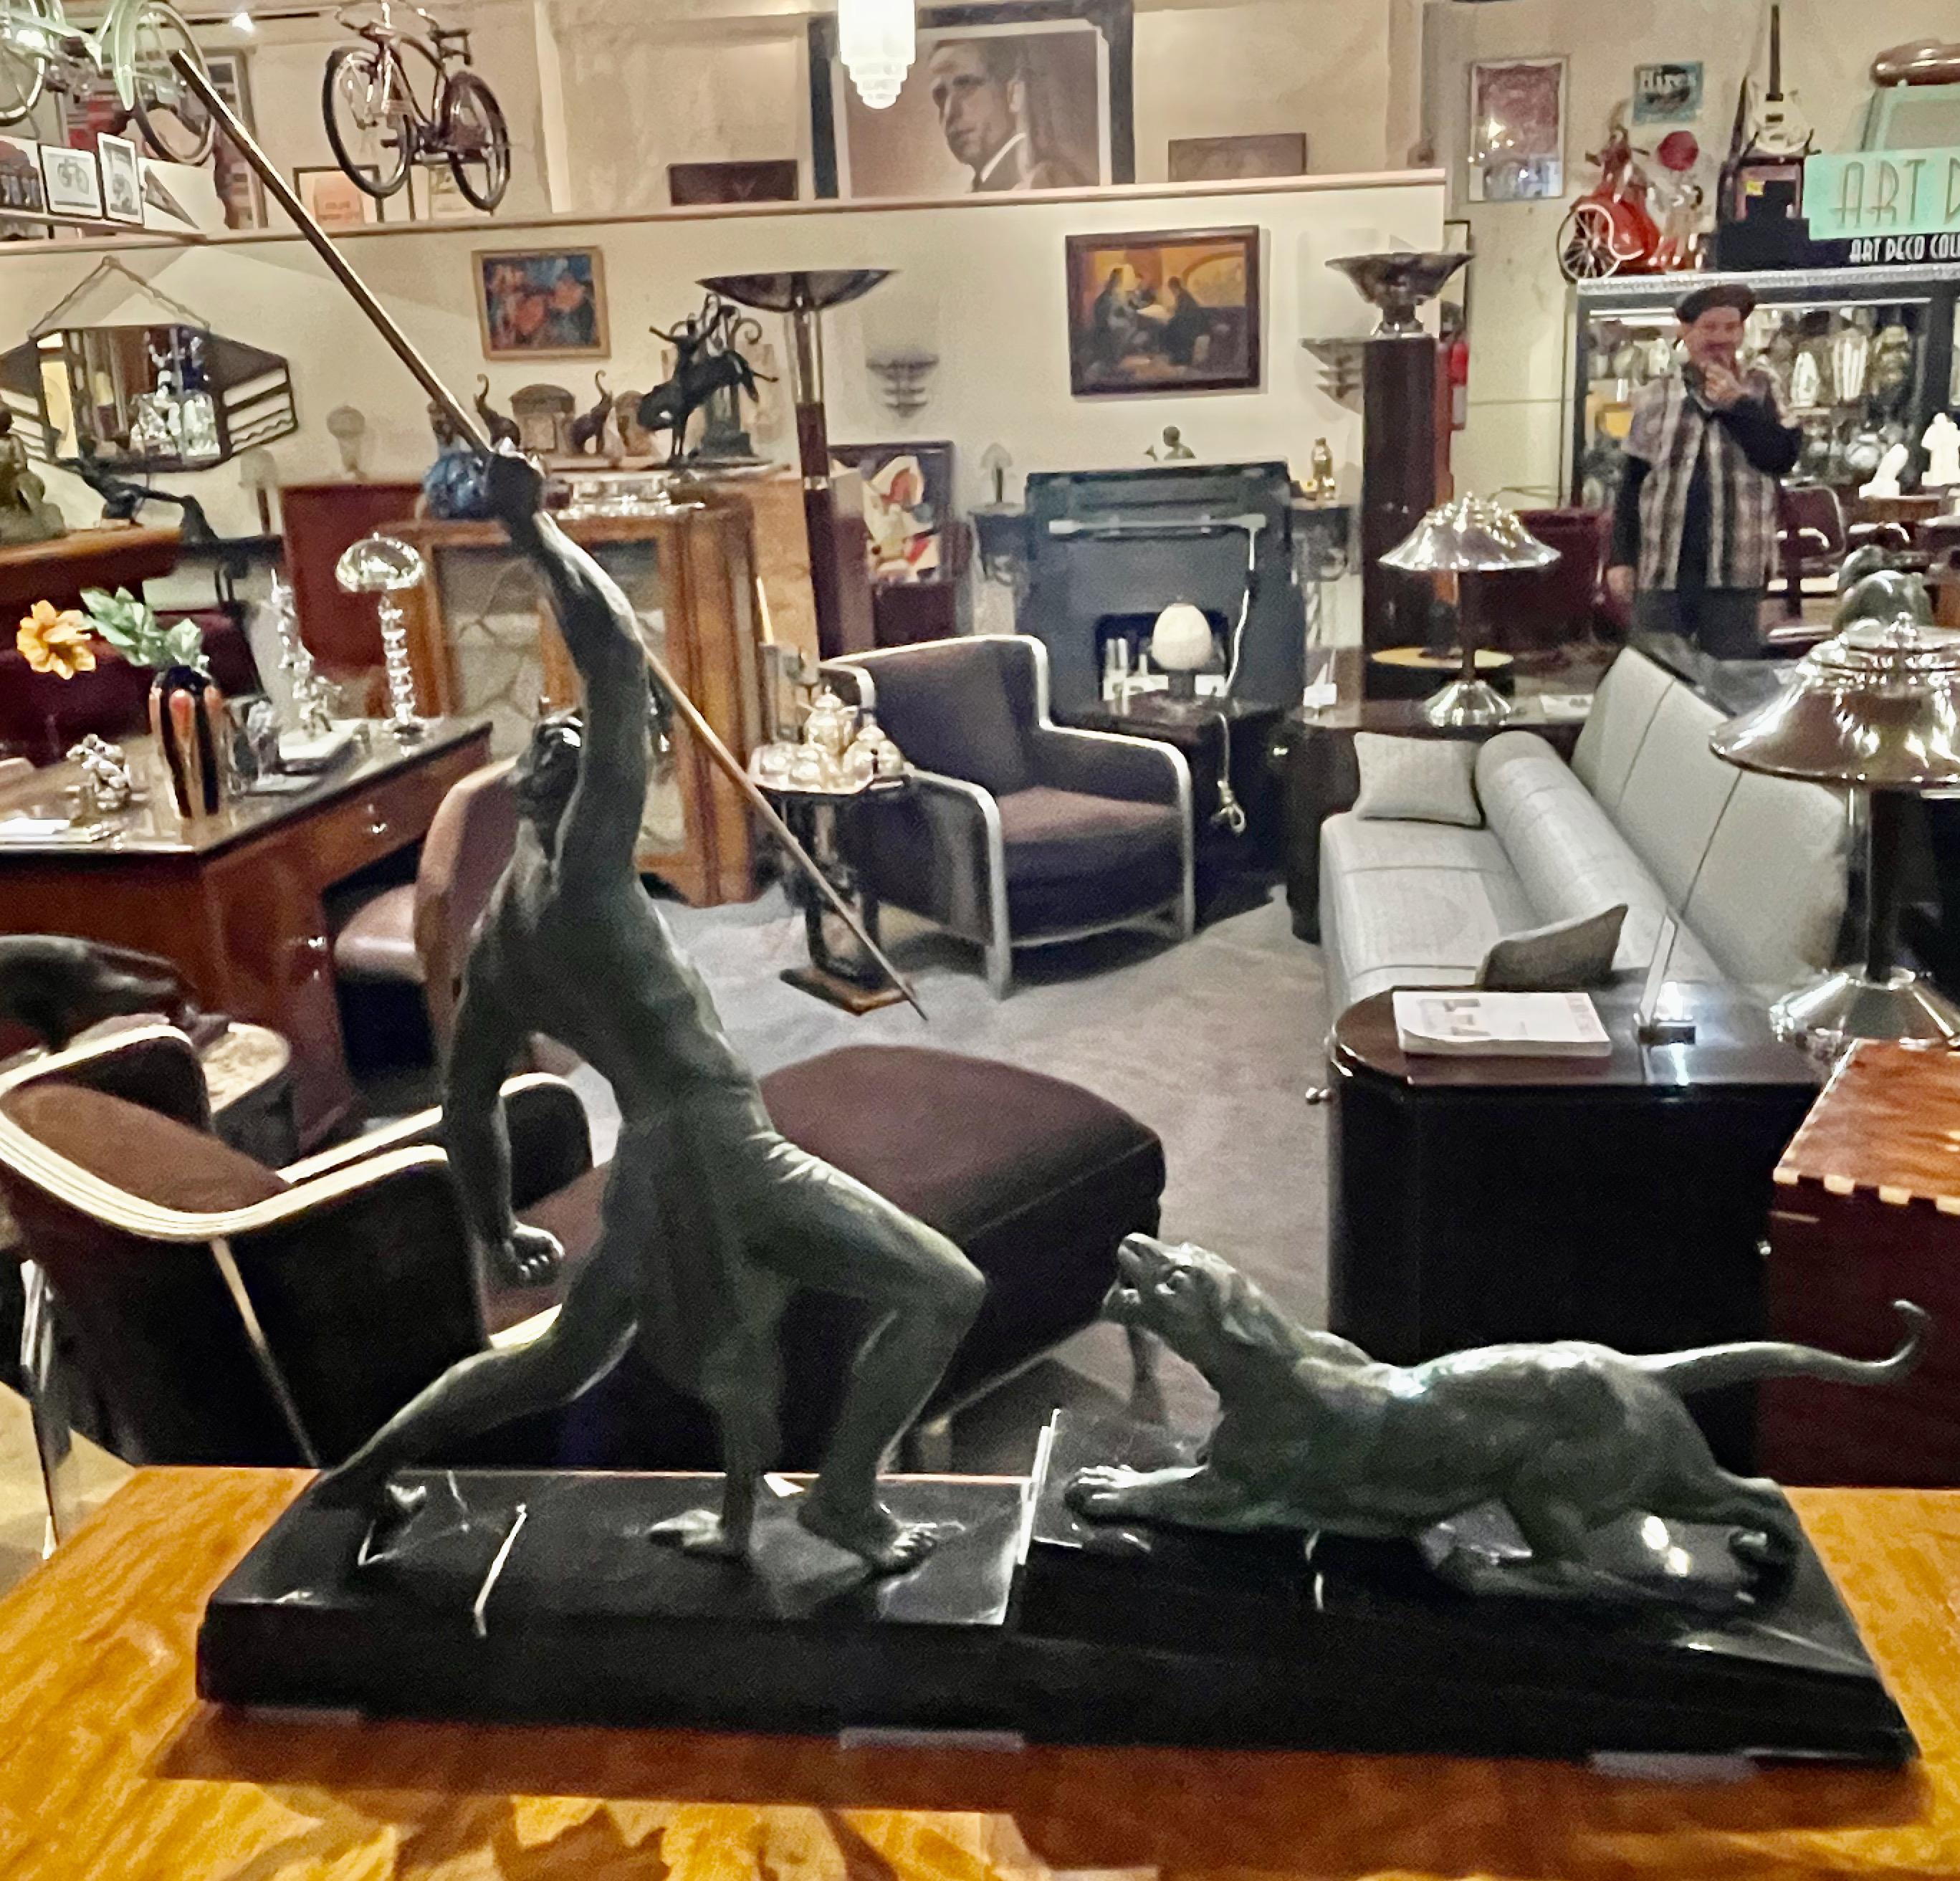 Chiparus 'The Hunter' Large Art Deco Sculpture with Panther, 1930 For Sale 1